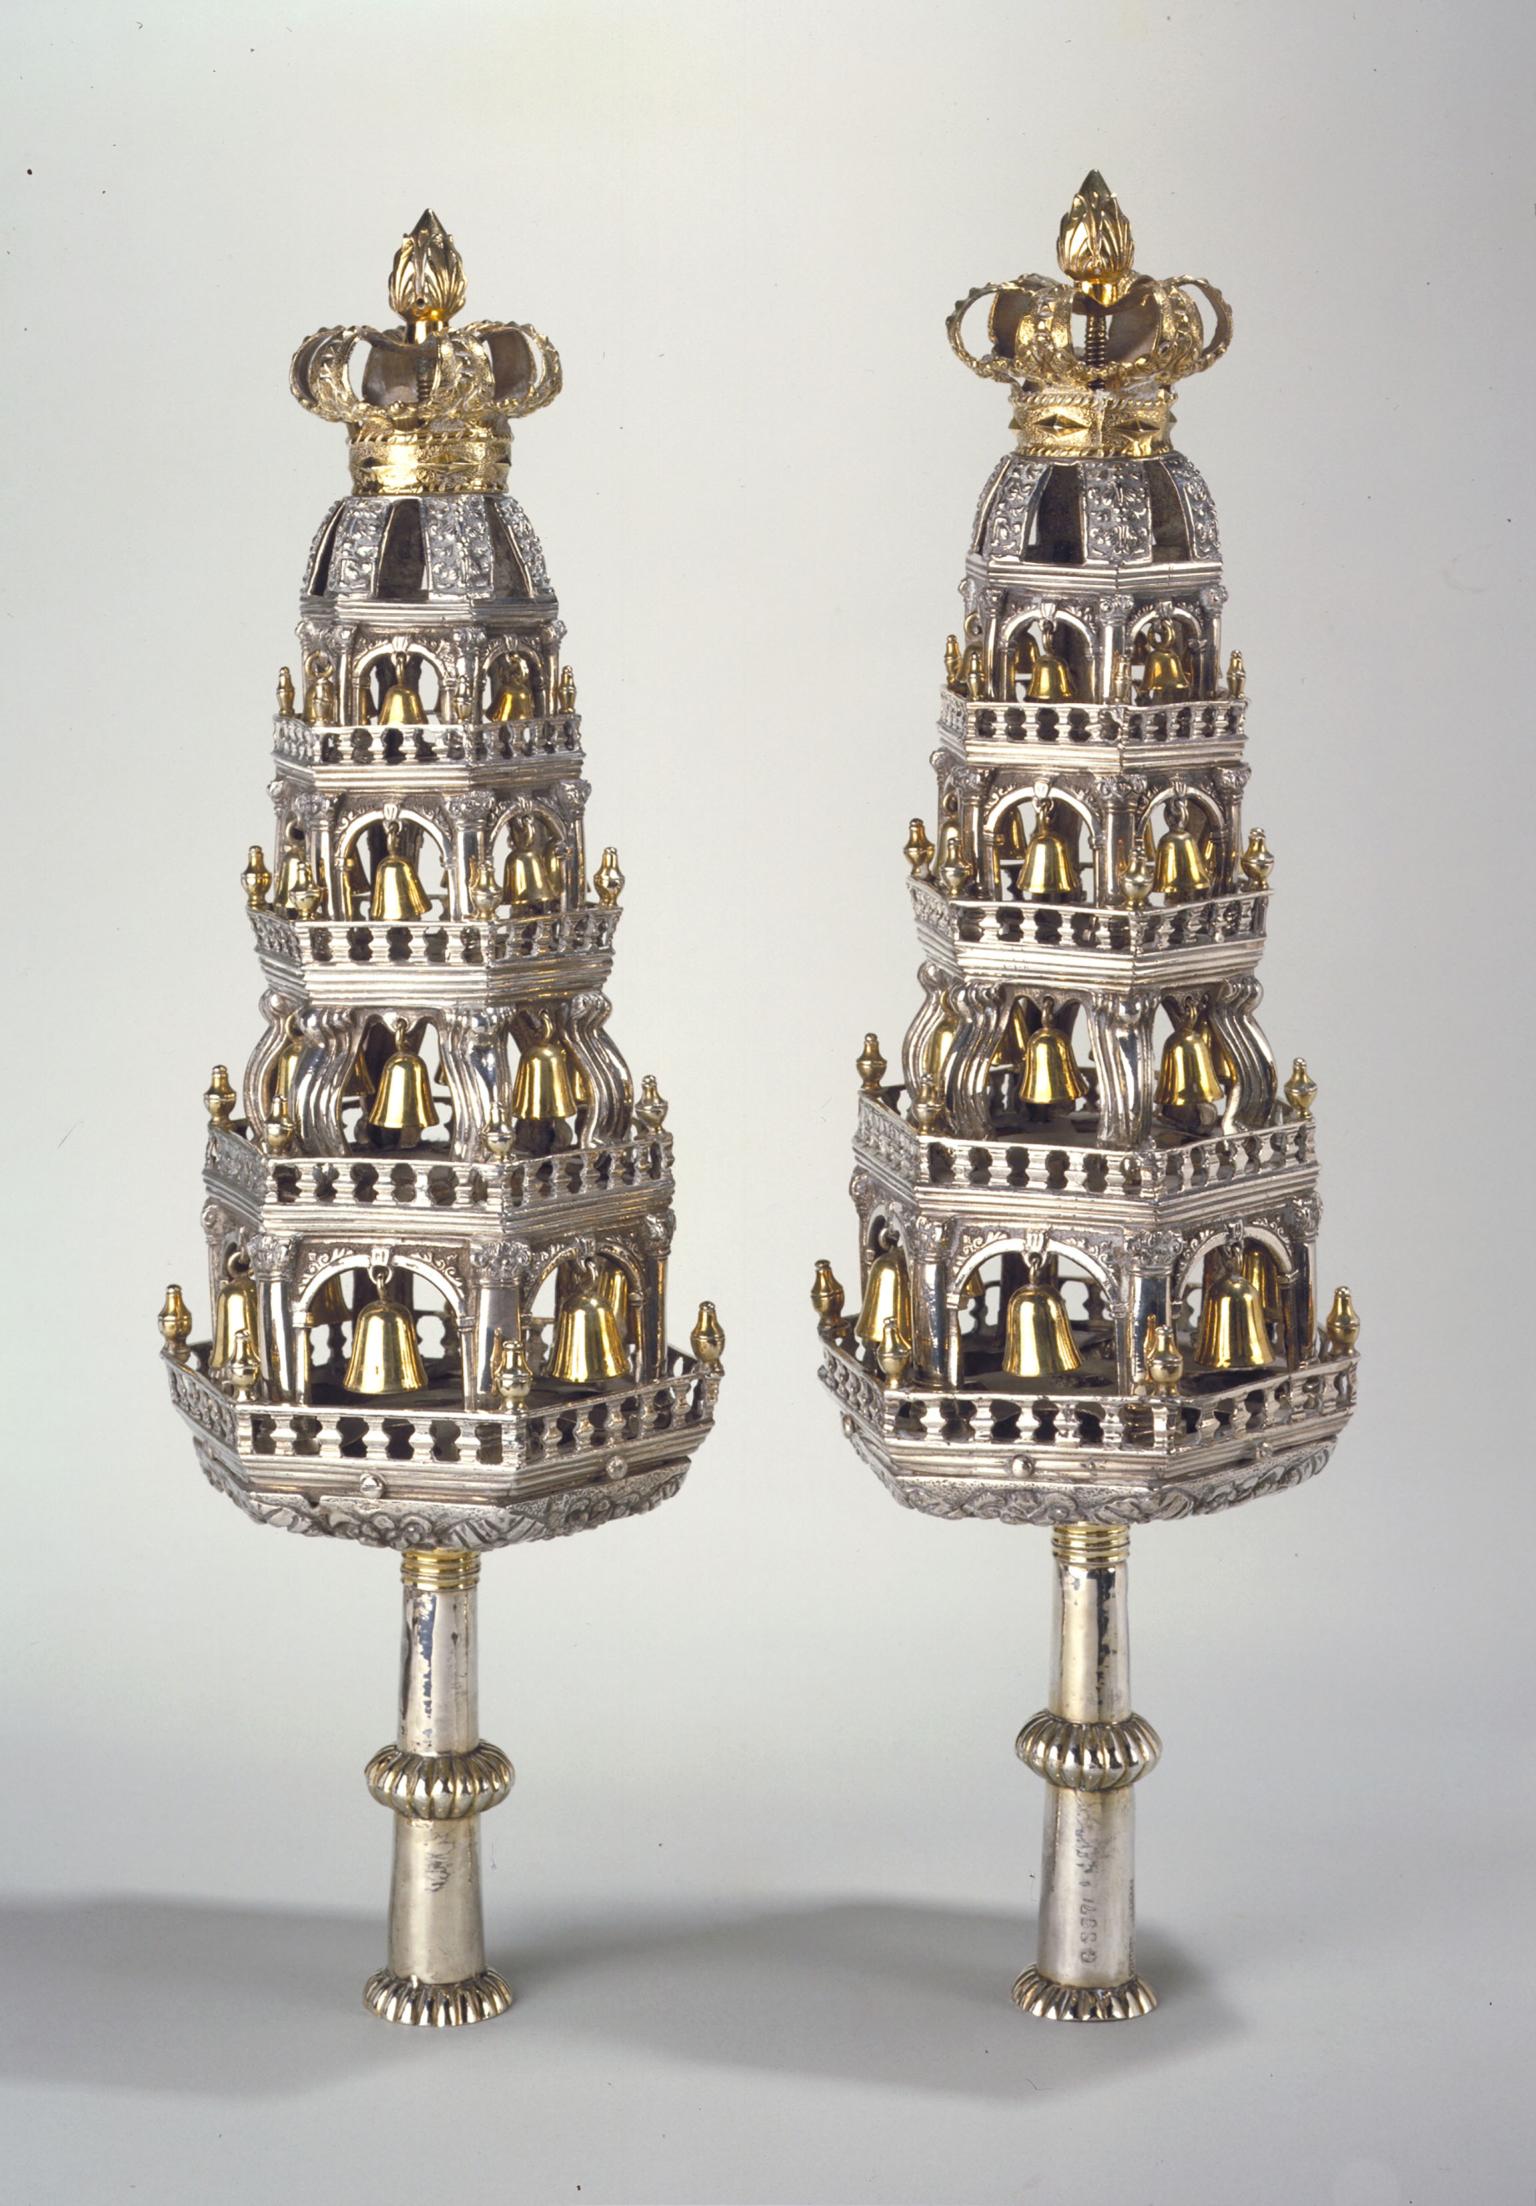 Pair of silver tower-shaped finials with crowns constructed like multitiered towers of arched cutouts decorated with bells. 